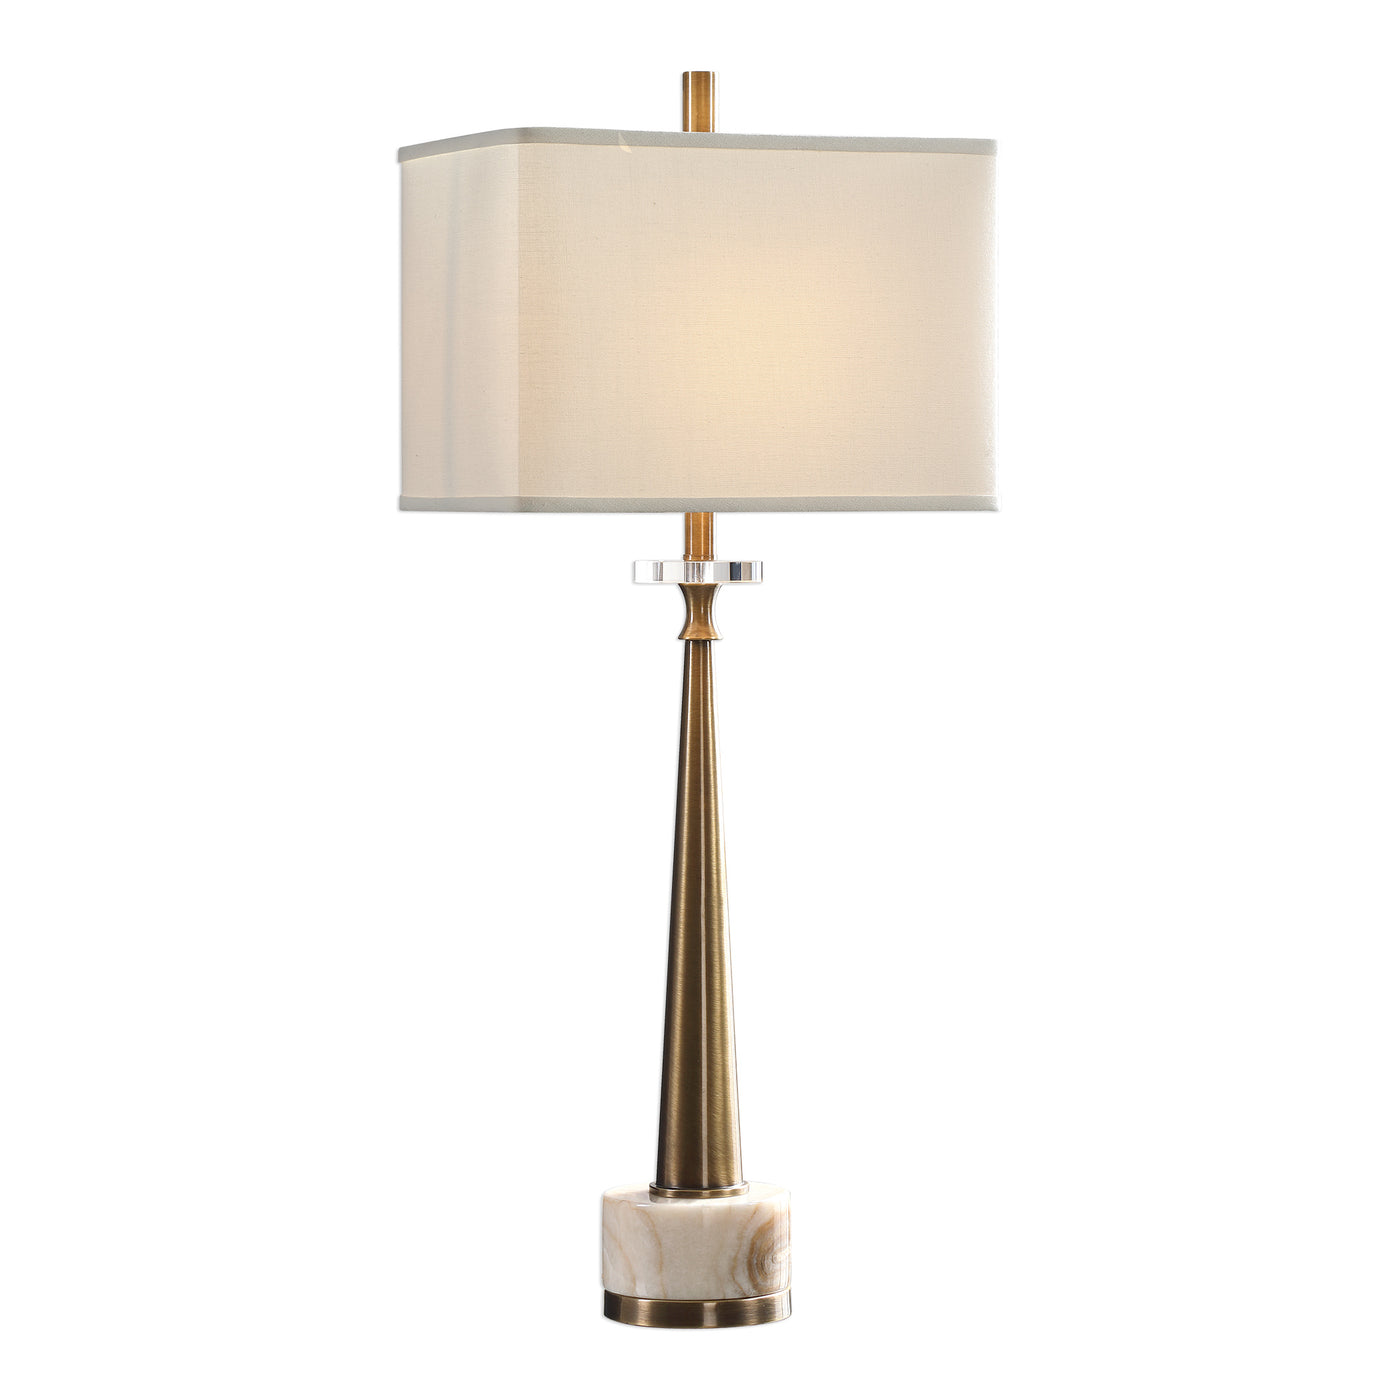 This Tapered Steel Base Is Finished In A Plated Antiqued Brass, Paired With An Ivory Marble Foot With Brown Veining And A ...